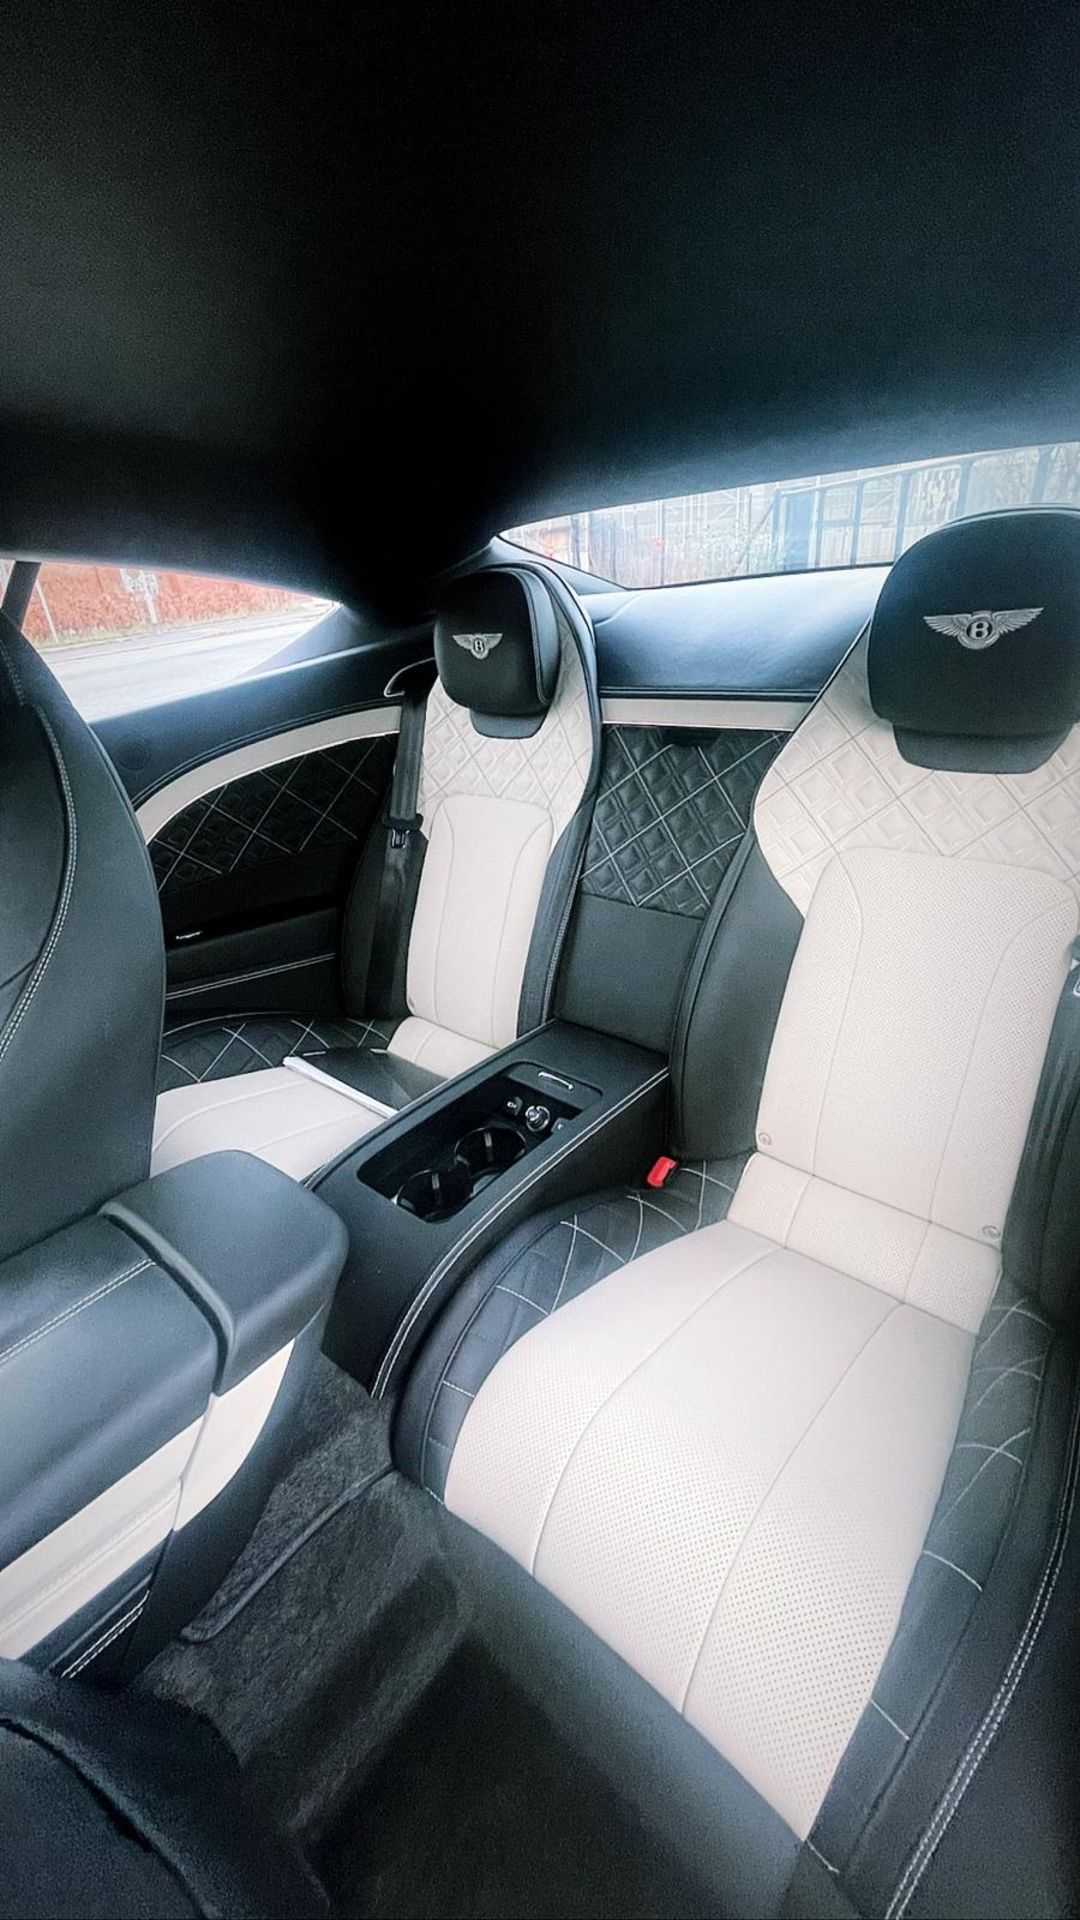 2018 BENTLEY CONTINENTAL GT 6.0 W12 1st EDITION AUTO, COMFORT SEATING, ONLY 10,200 MILES *PLUS VAT* - Image 8 of 14